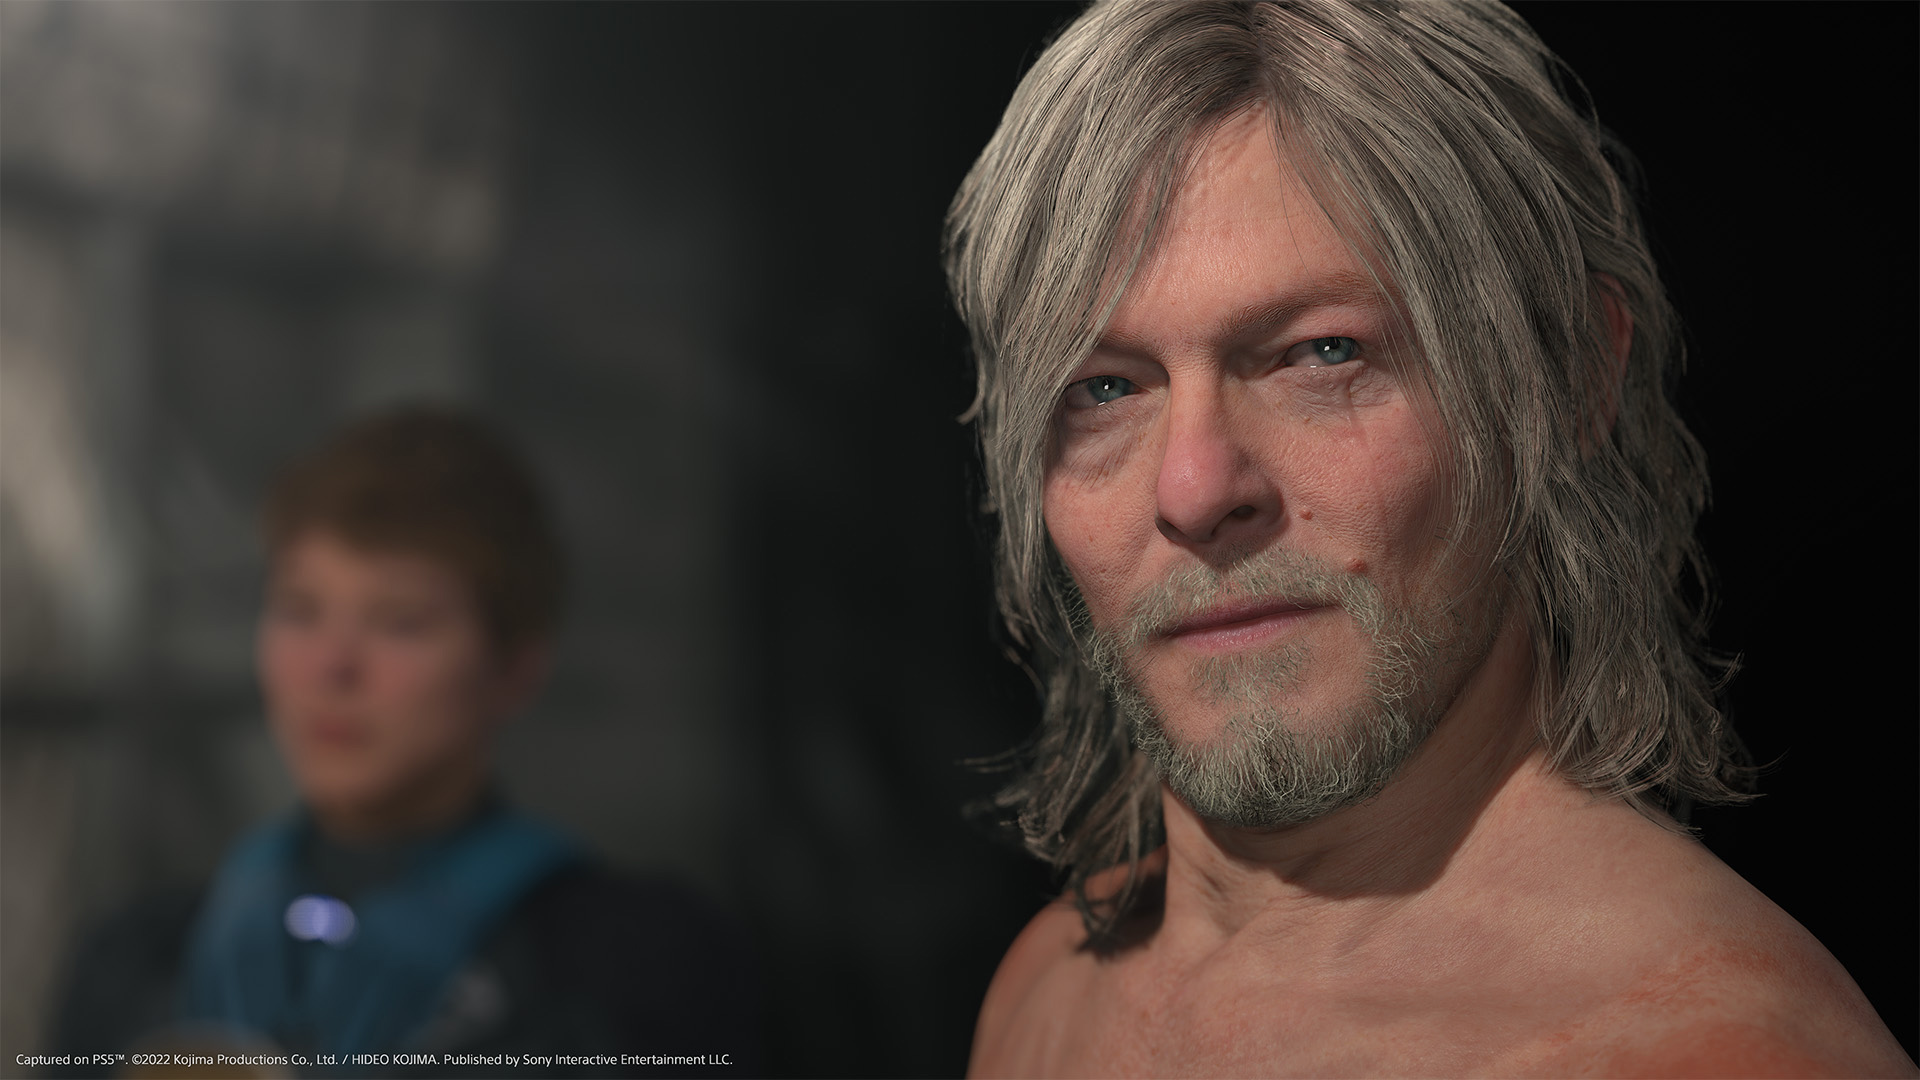 Death Stranding 2: Everything we know so far